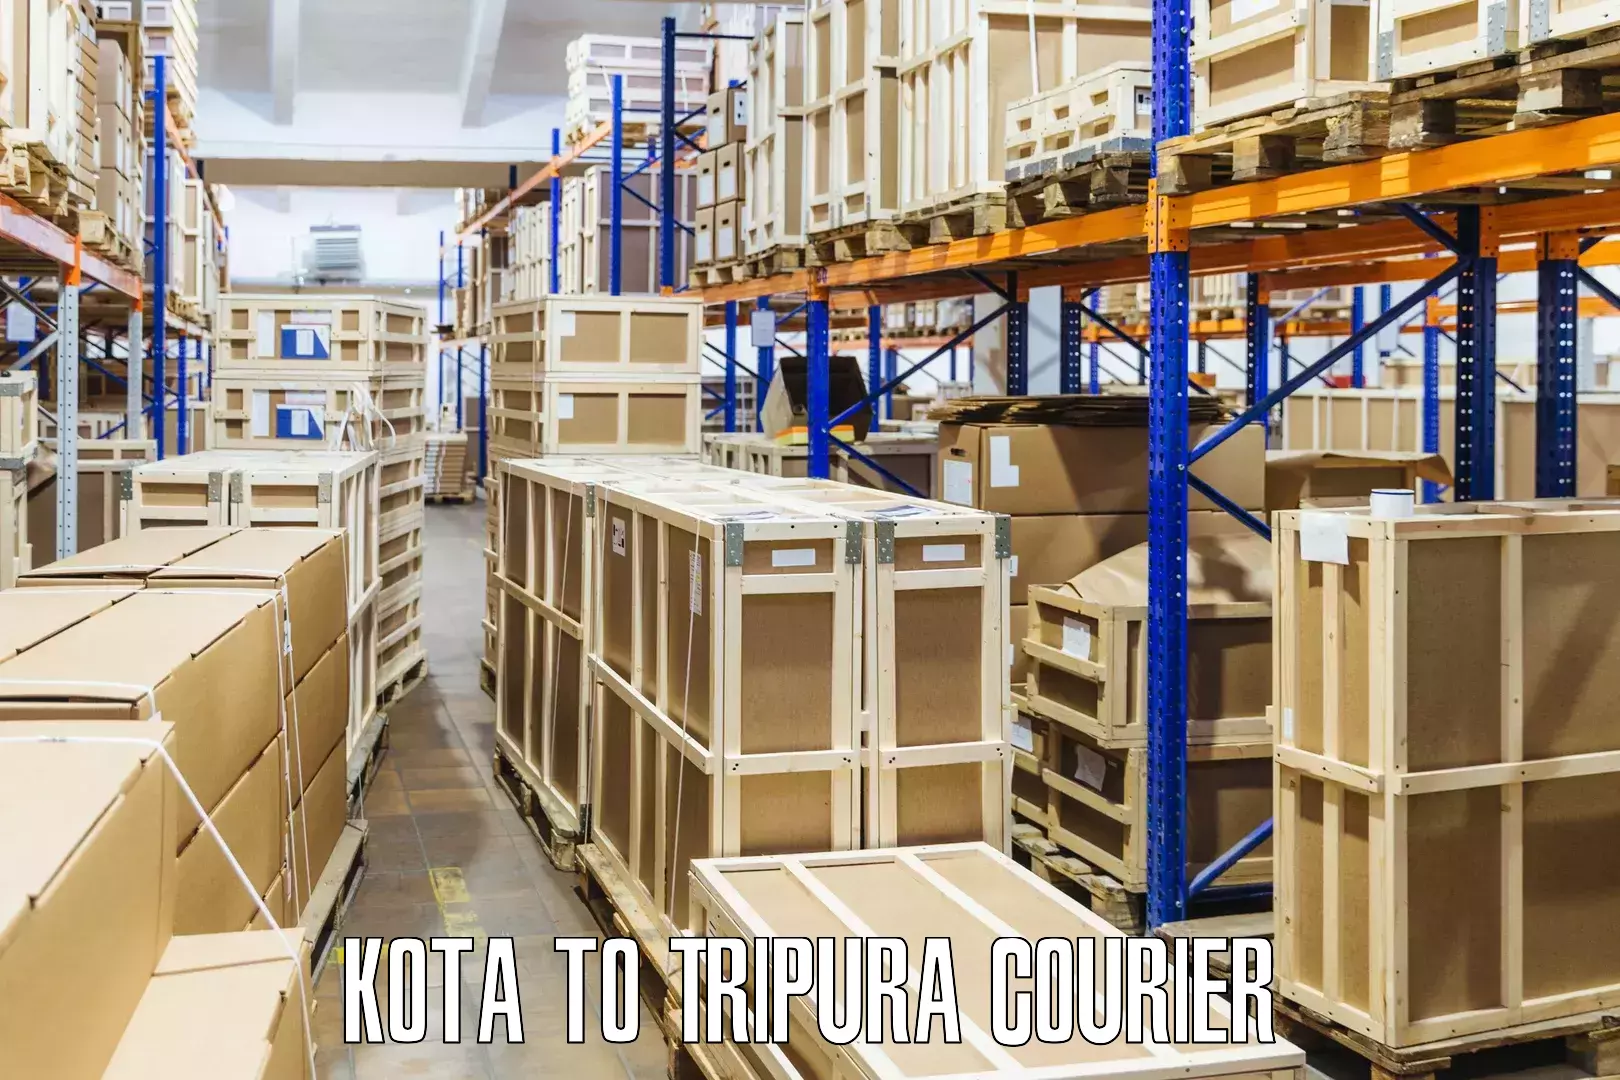 Package delivery network Kota to Tripura